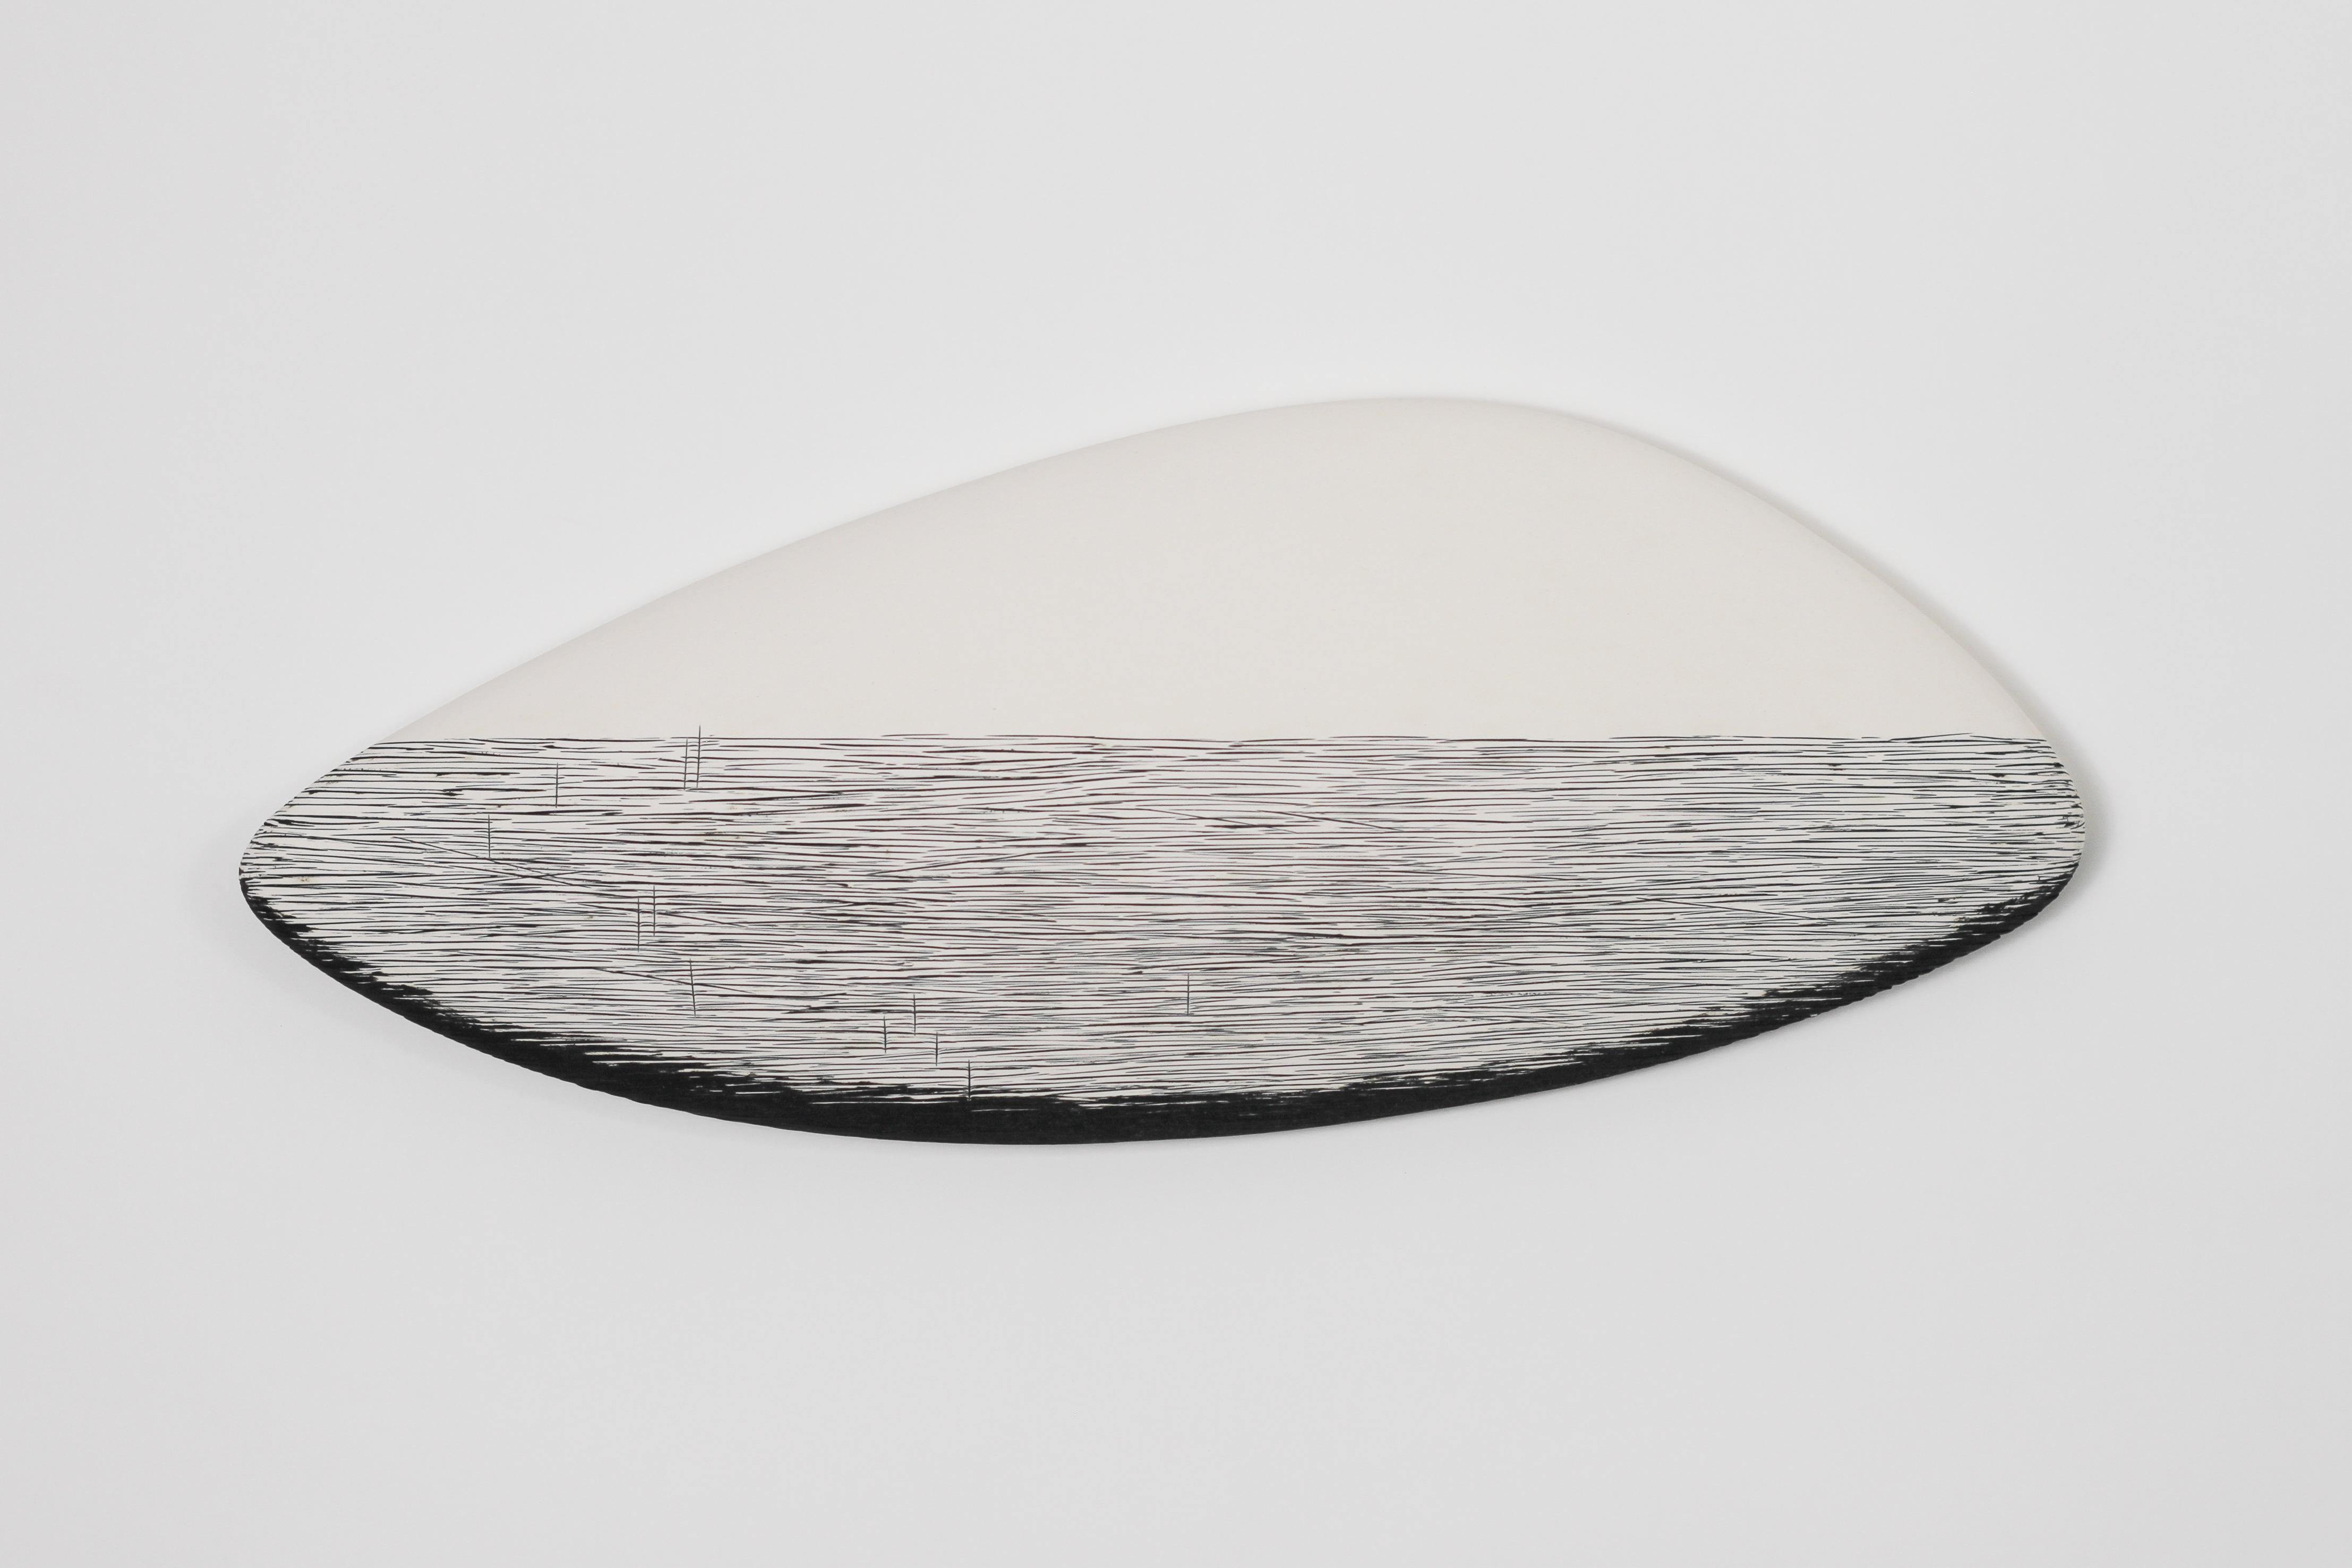 Original artwork by Robyn Campbell.
Still 4, wall mounted ceramic, 17cm x 41cm x 4cm (d), 2024
Simplicity, line, material, surface, and form are the focus of Robyn Campbell’s art practice. In this exhibition she uses various mediums, along with line